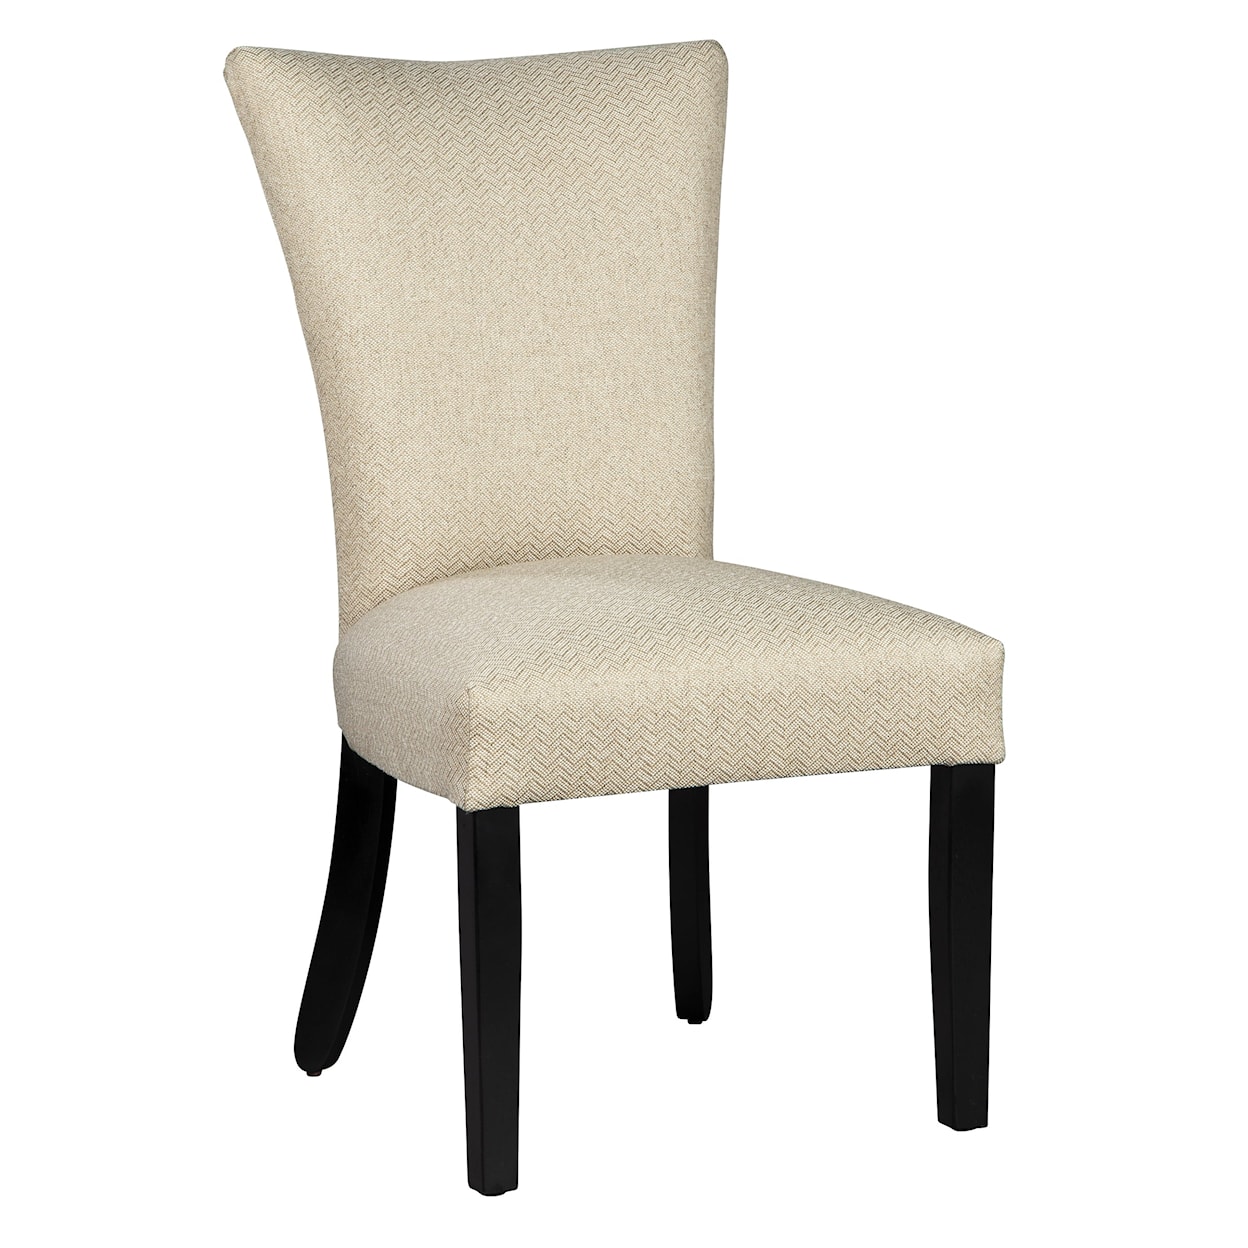 Hekman Upholstery Dining Chair with Flex Back